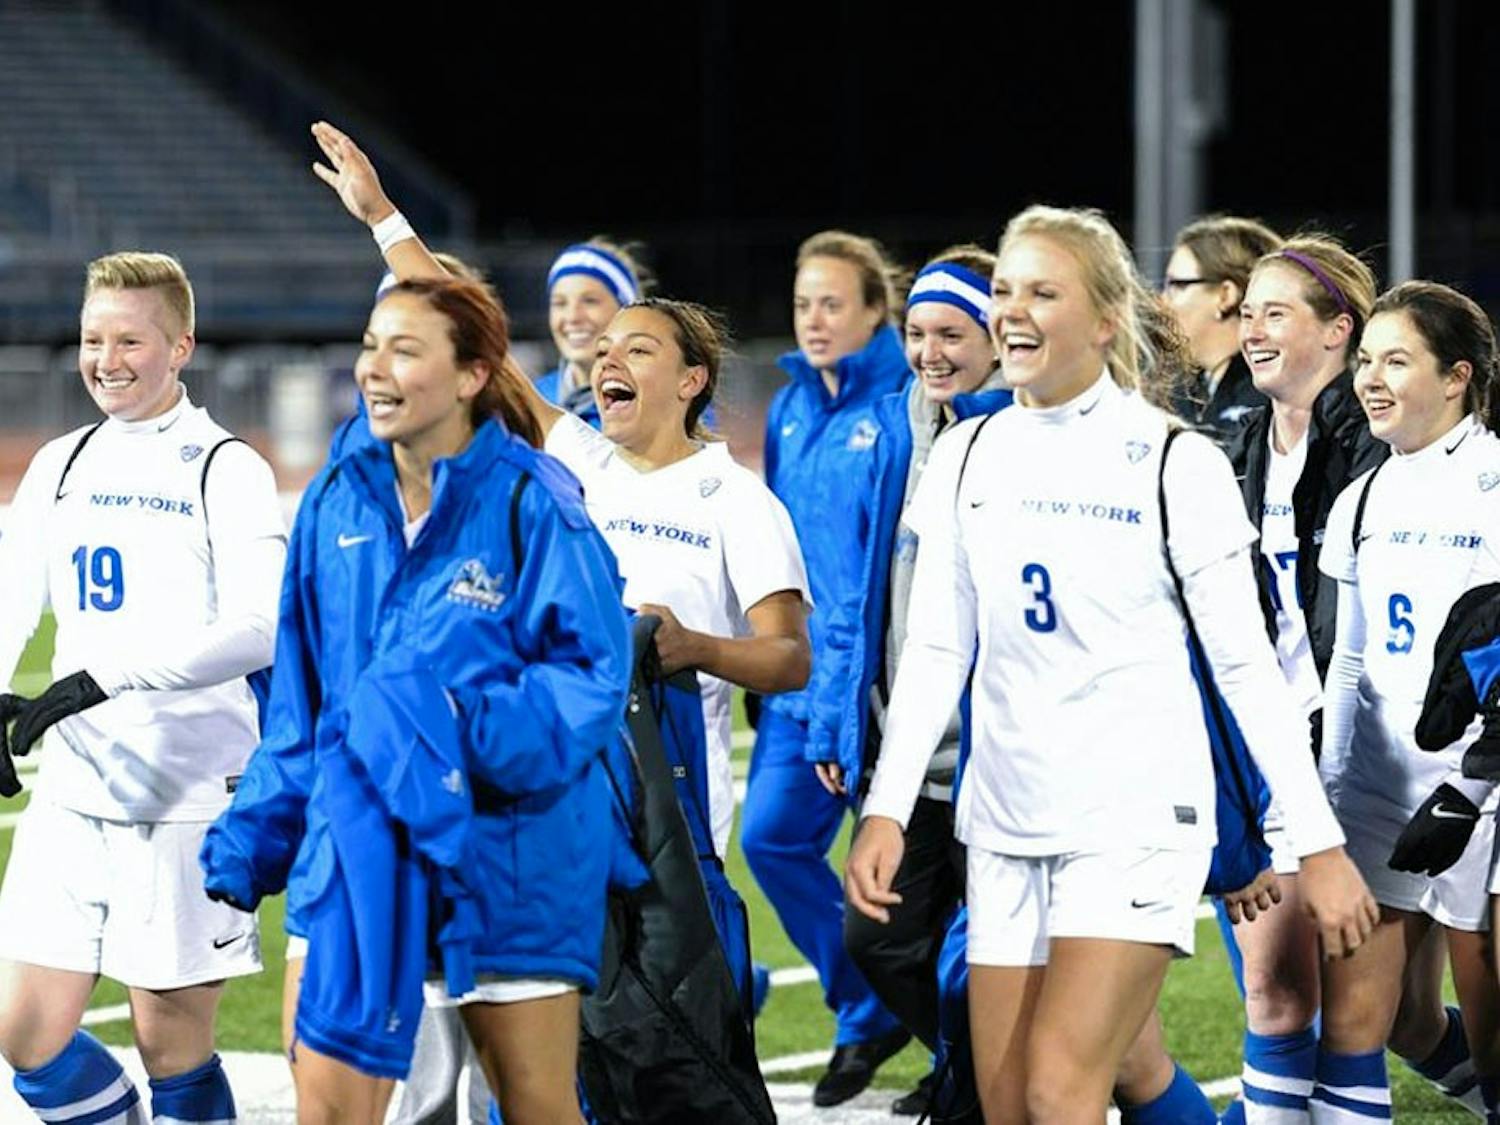 Members of the 2015-16 UB women's soccer team celebrate after a matchup in the MAC Tournament. Kay players will not return next year, but a solid spring season leaves Shawn Burke relaxed about replacing them.&nbsp;